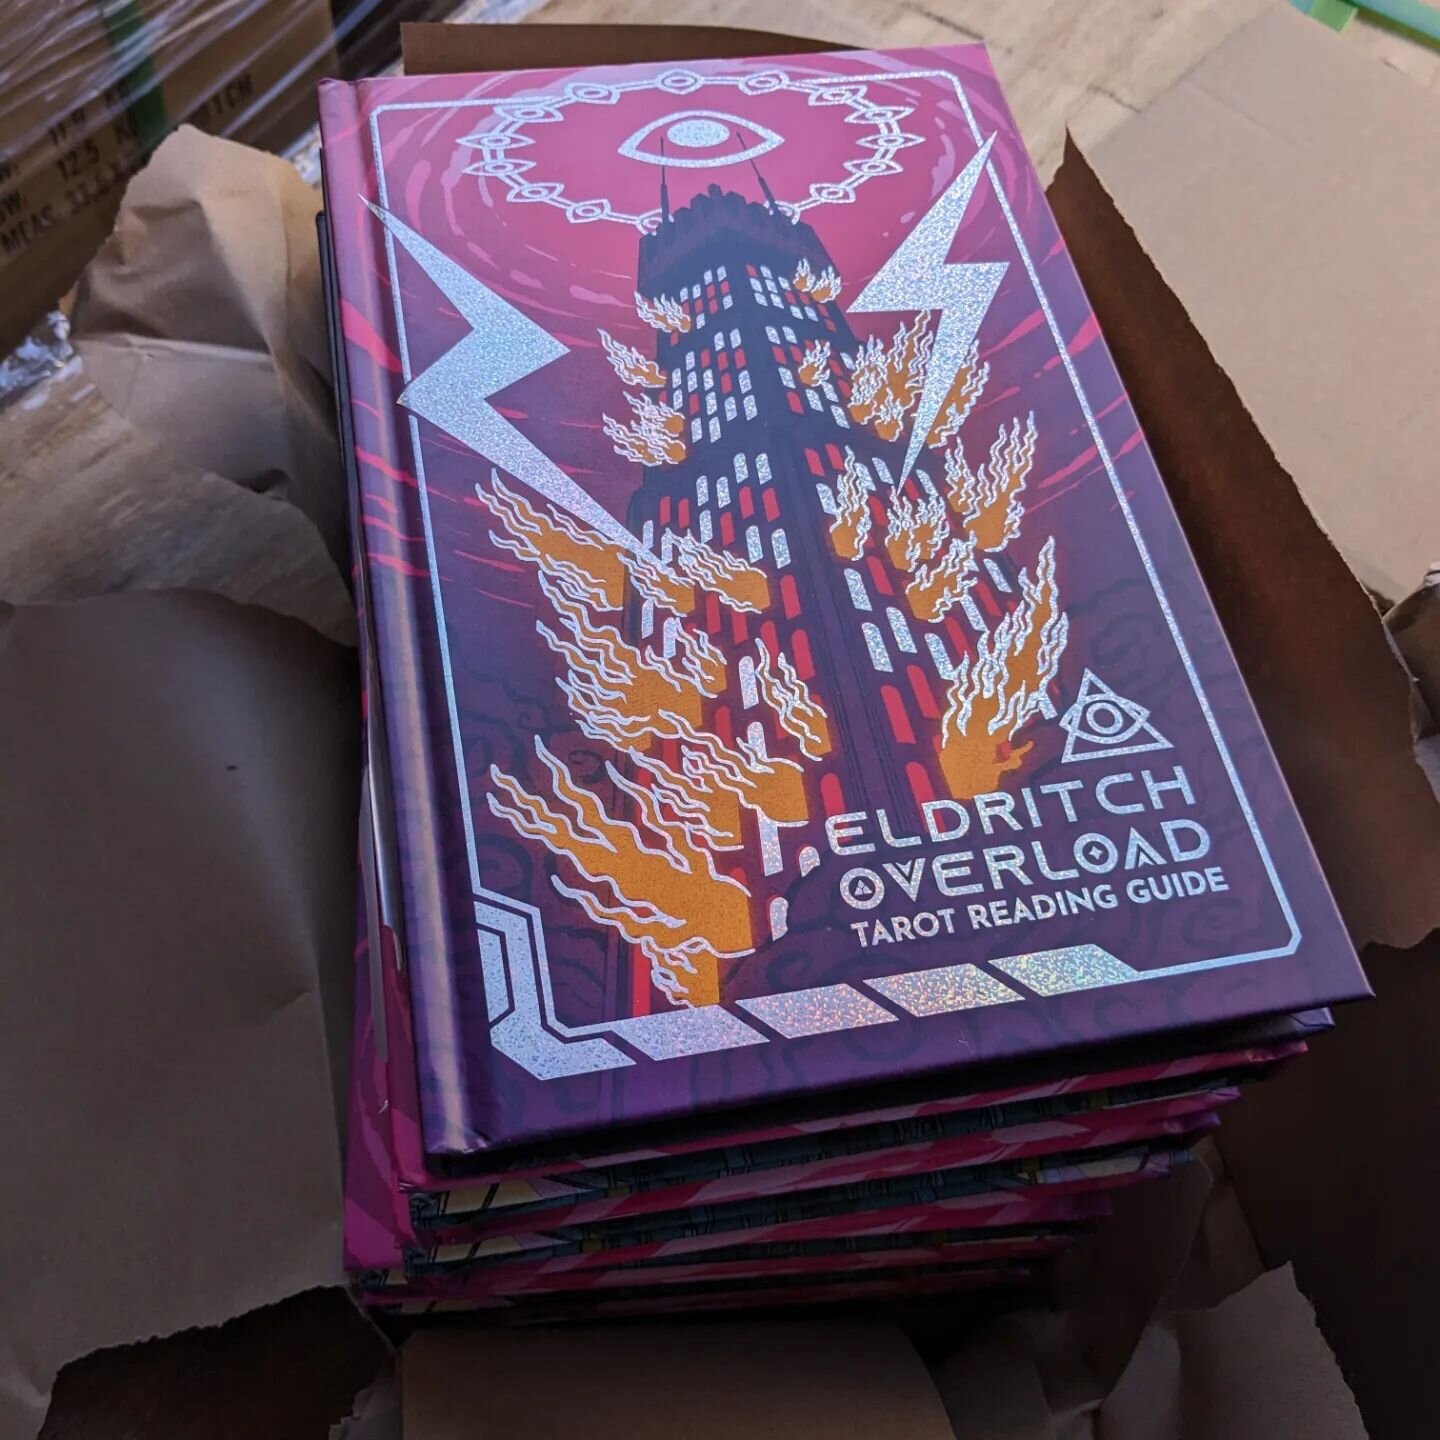 Just arrived!  The Eldritch Overload Tarot Reading guide.  This is a reprint of the tarot portion of our sold out codex.  Now available in our webstore.